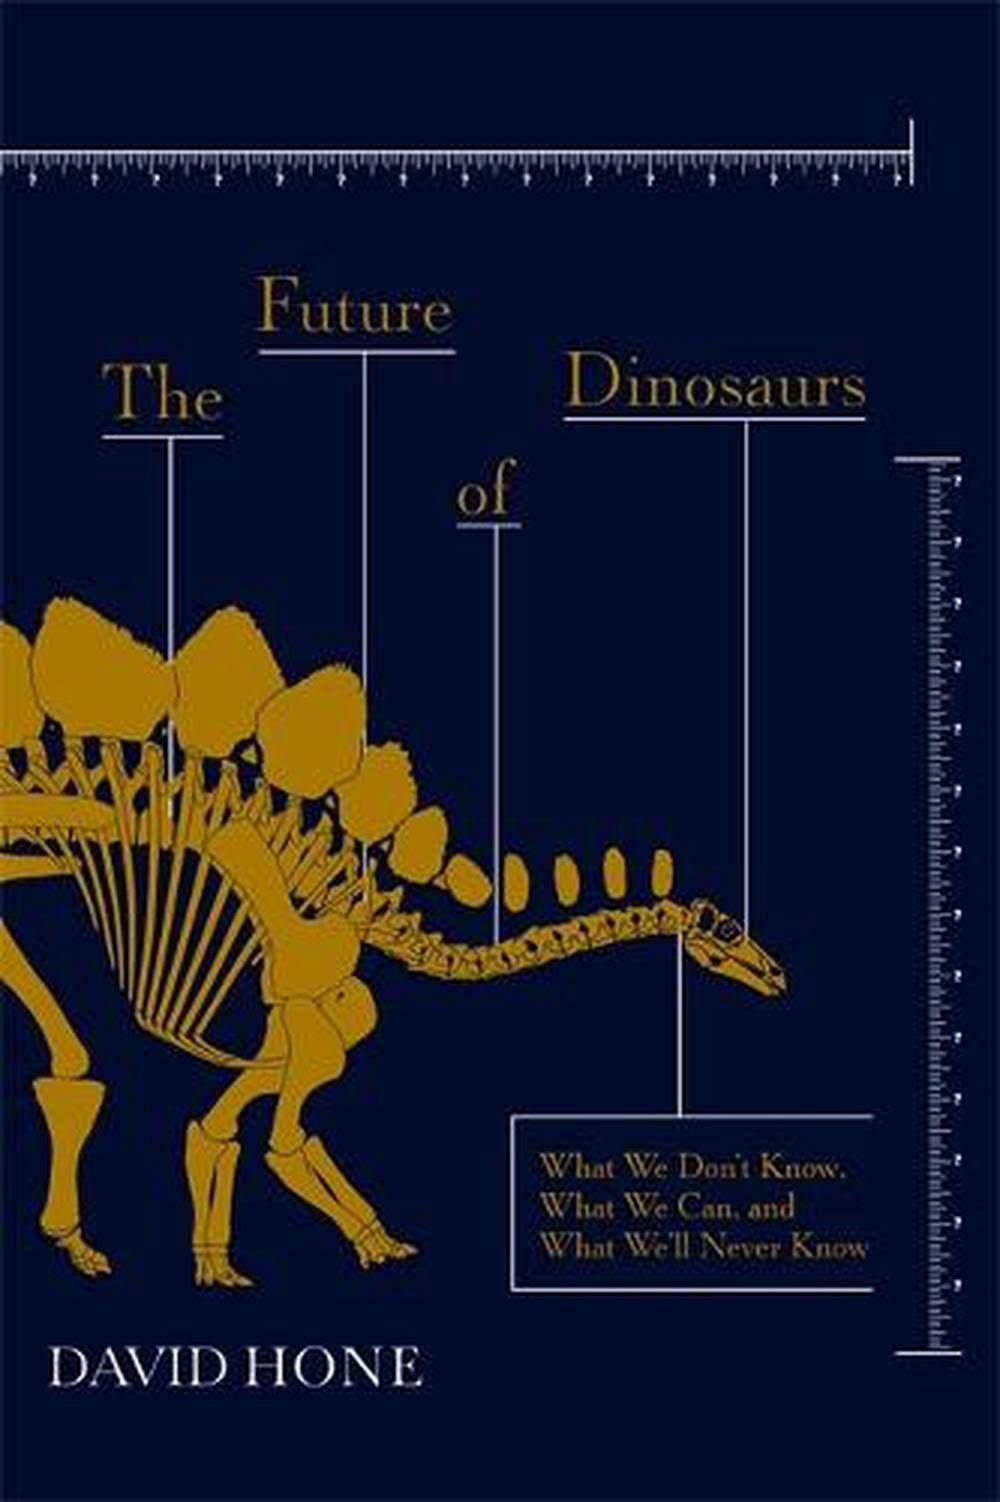 The Future of Dinosaurs: What We Don't Know, What We Can, and What We'll Never Know [Book]